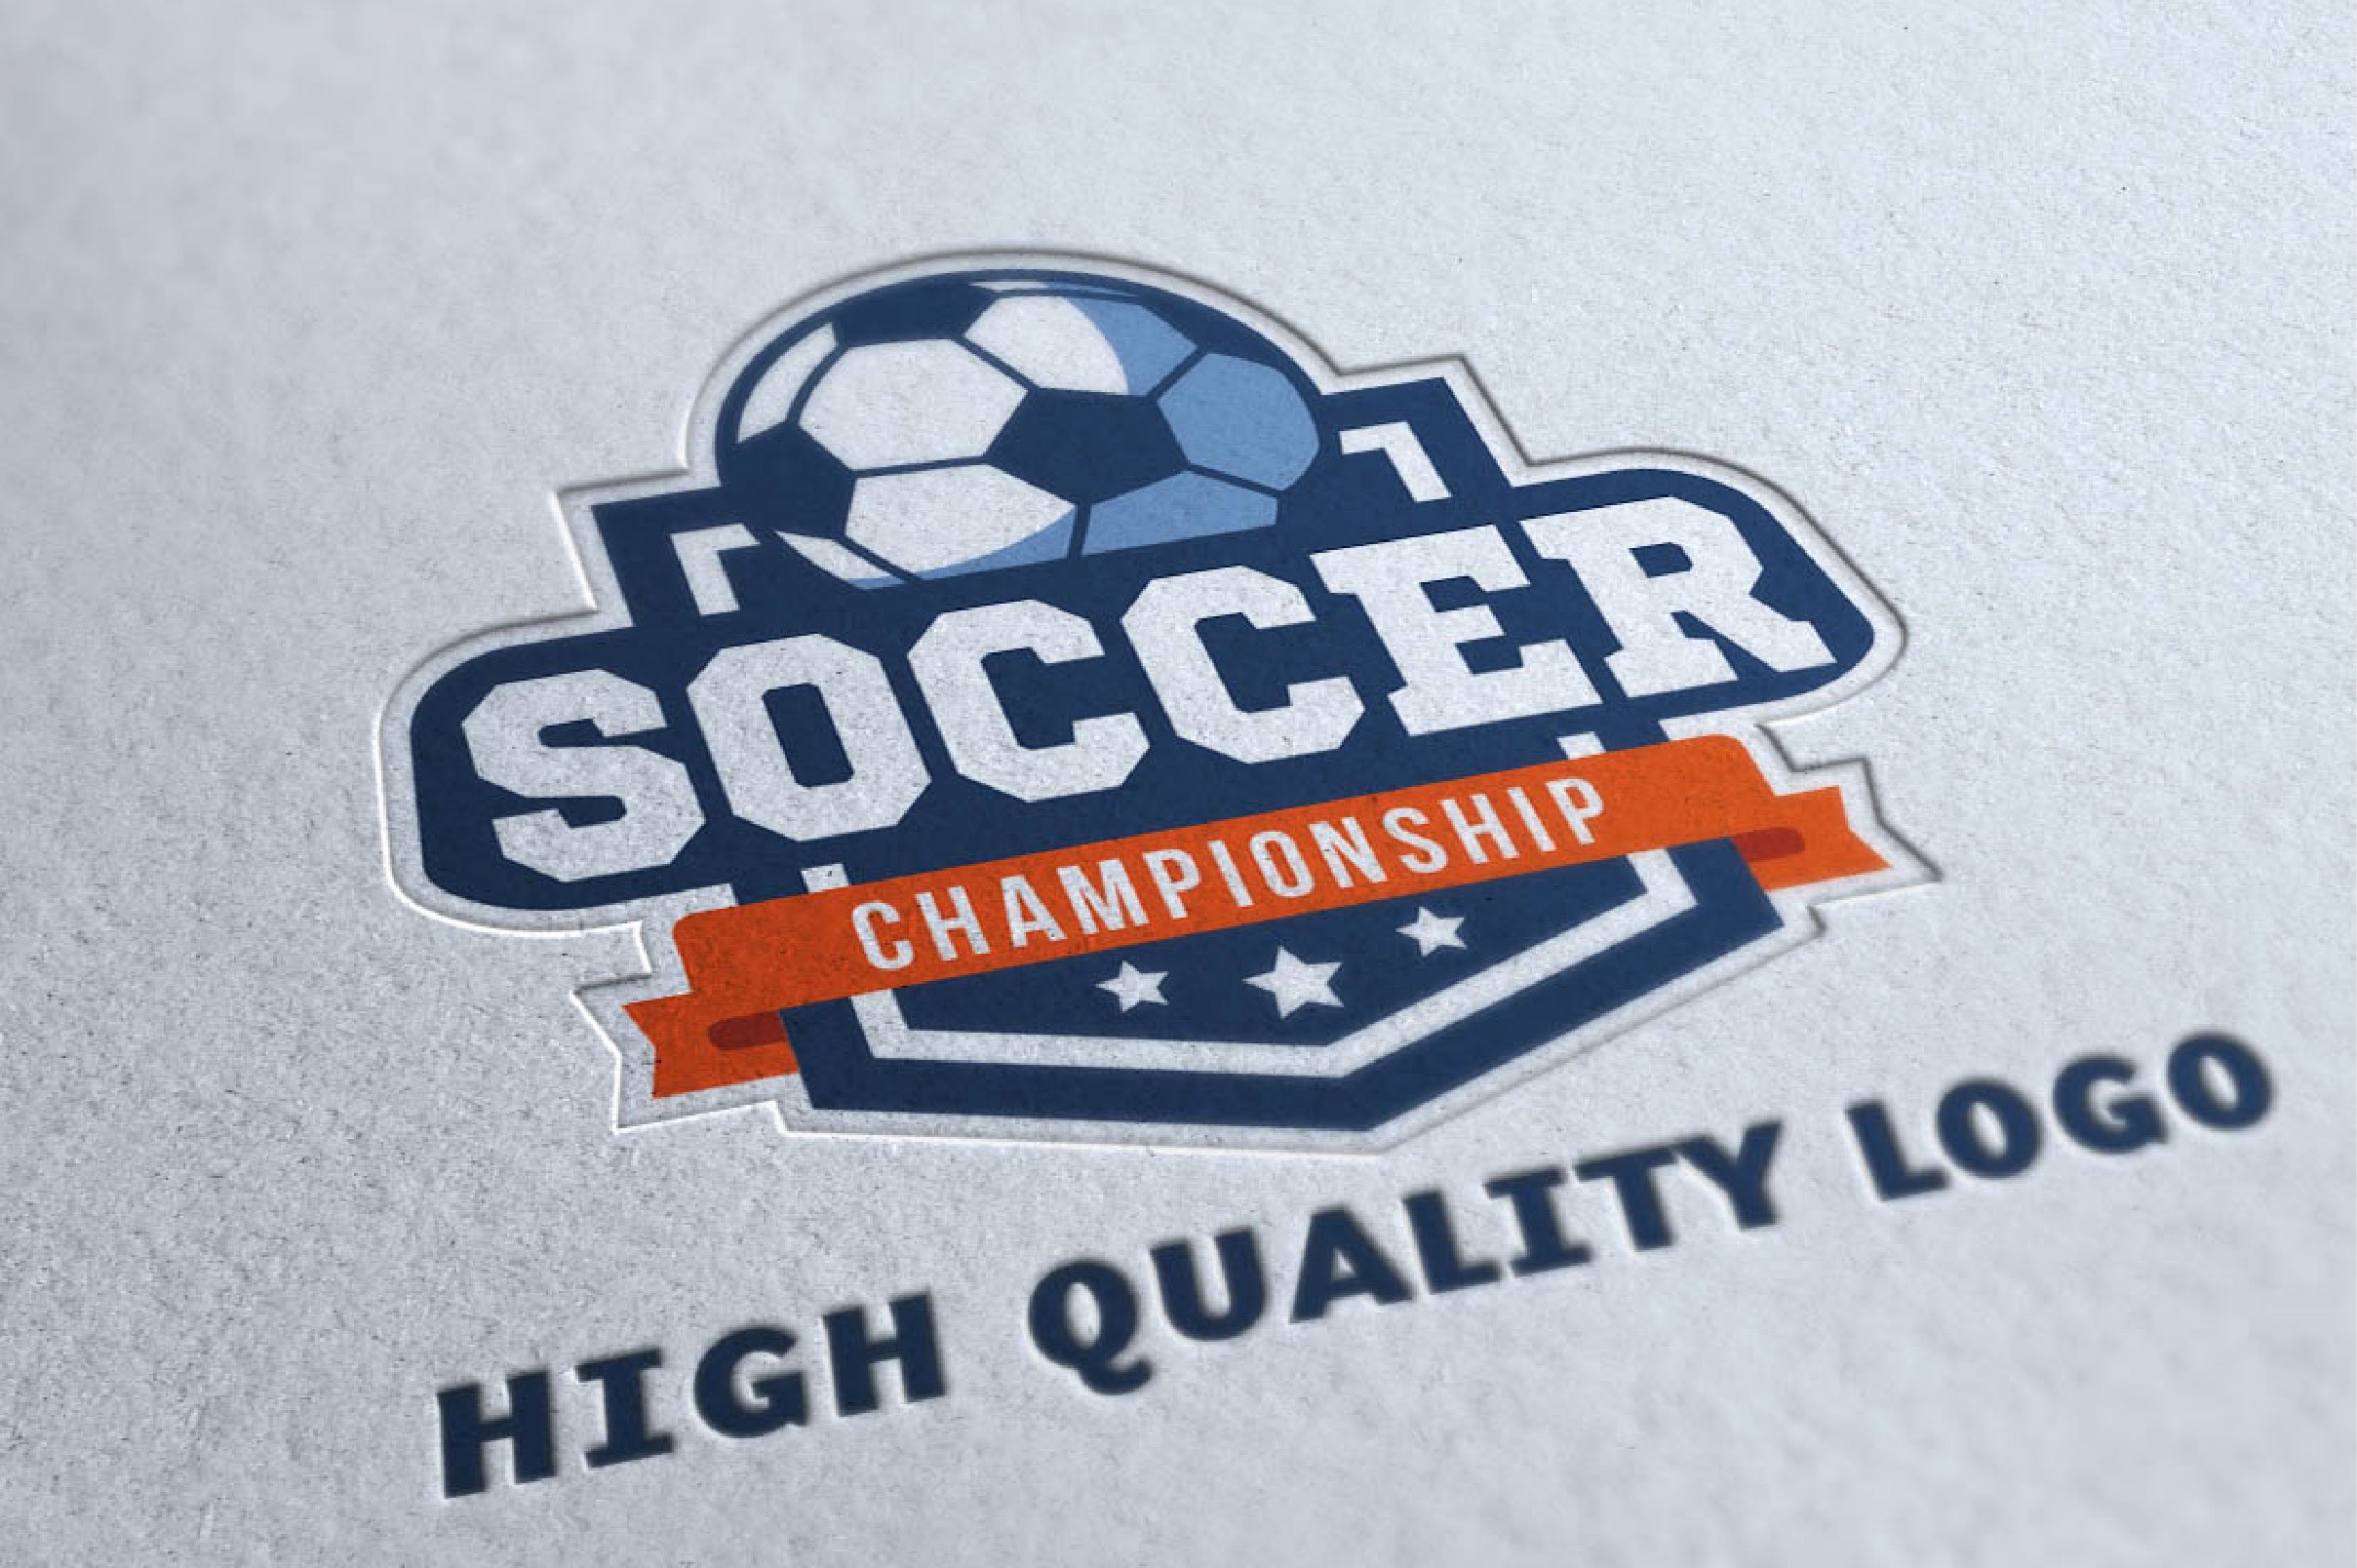 Grey matte paper with a classic soccer logo.